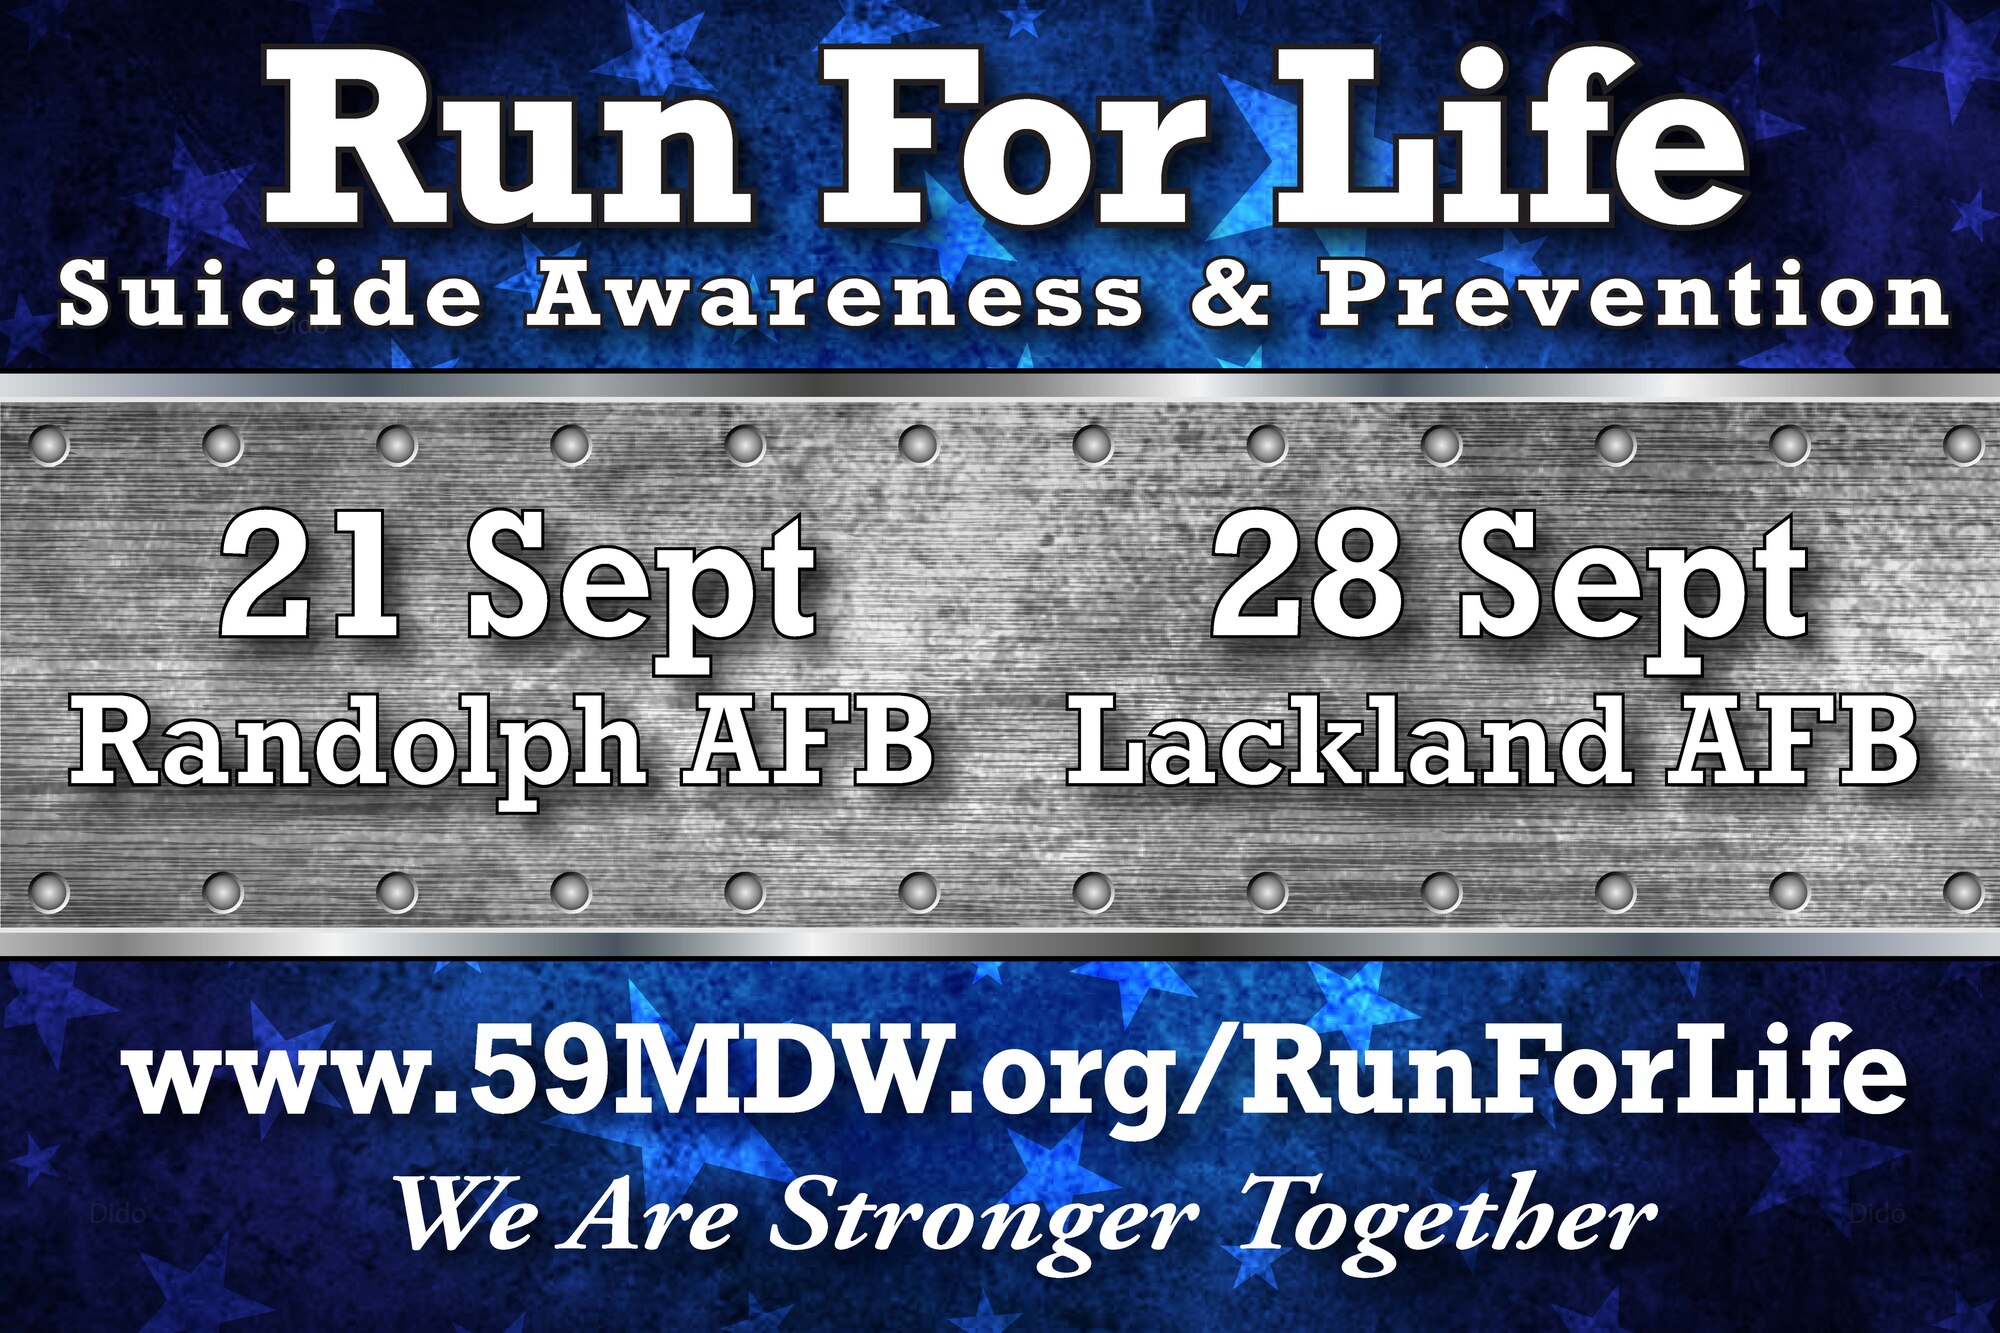 Runs for Life and Resiliency Fairs are scheduled from 9-11 a.m. Sept. 21 at JBSA-Randolph’s Heritage Park and 9-11 a.m. Sept. 28 at JBSA-Lackland’s Wilford Hall Ambulatory Surgical Center. Check-in begins at 8 a.m. Community members can register at www.59mdw.org/runforlife and buy T-shirts before sales end.